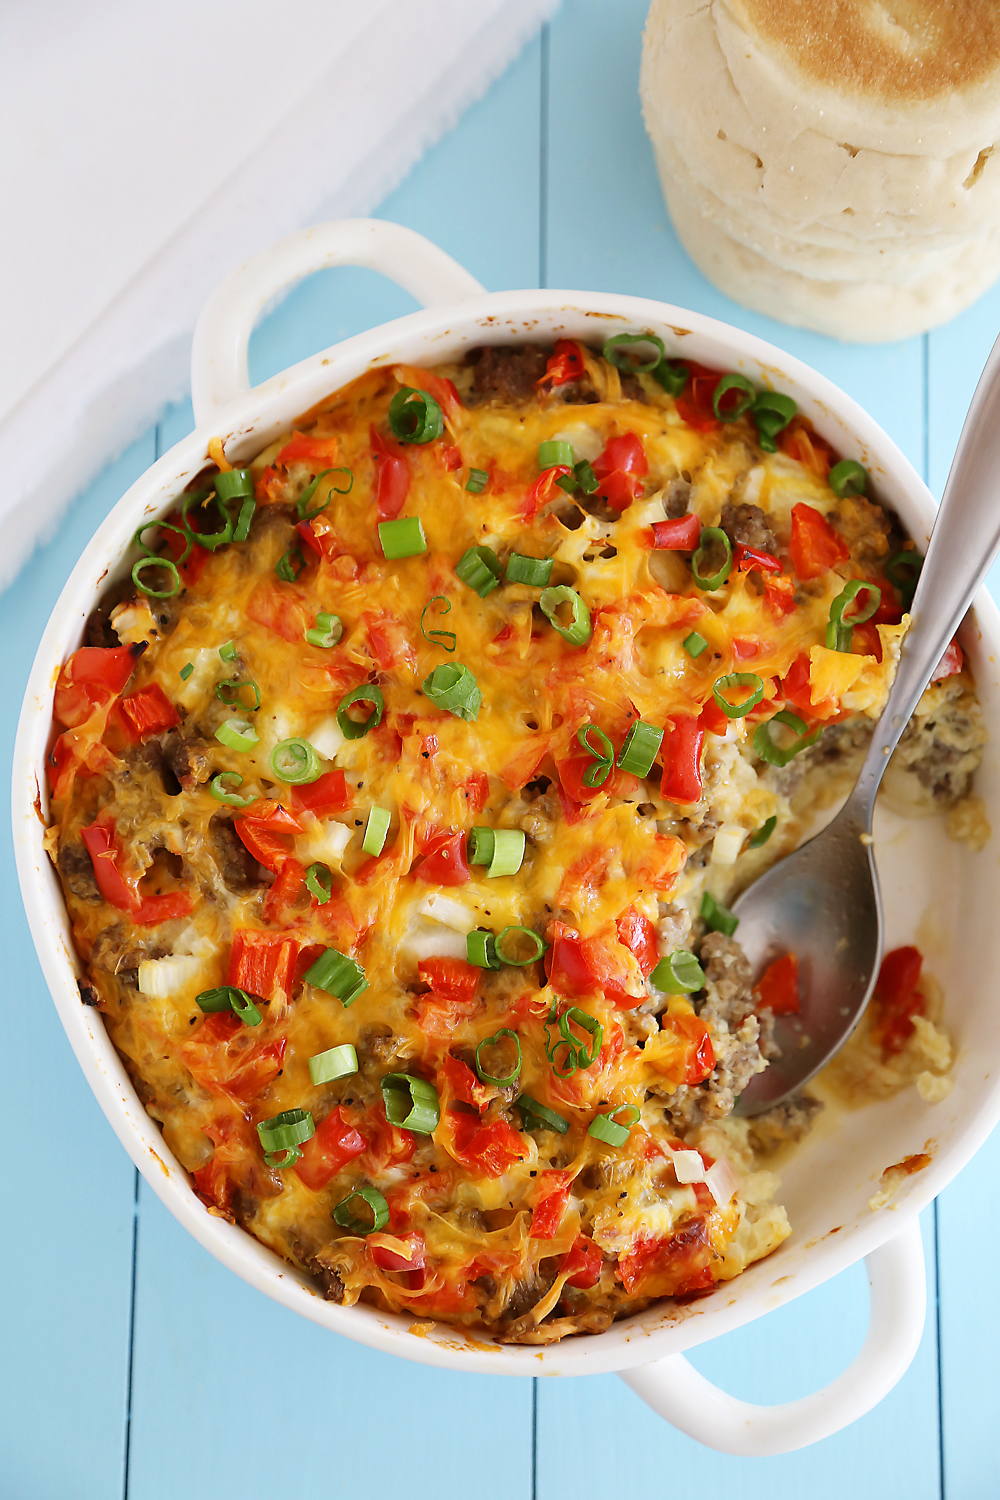 English Muffin Sausage, Egg and Cheese Breakfast Casserole